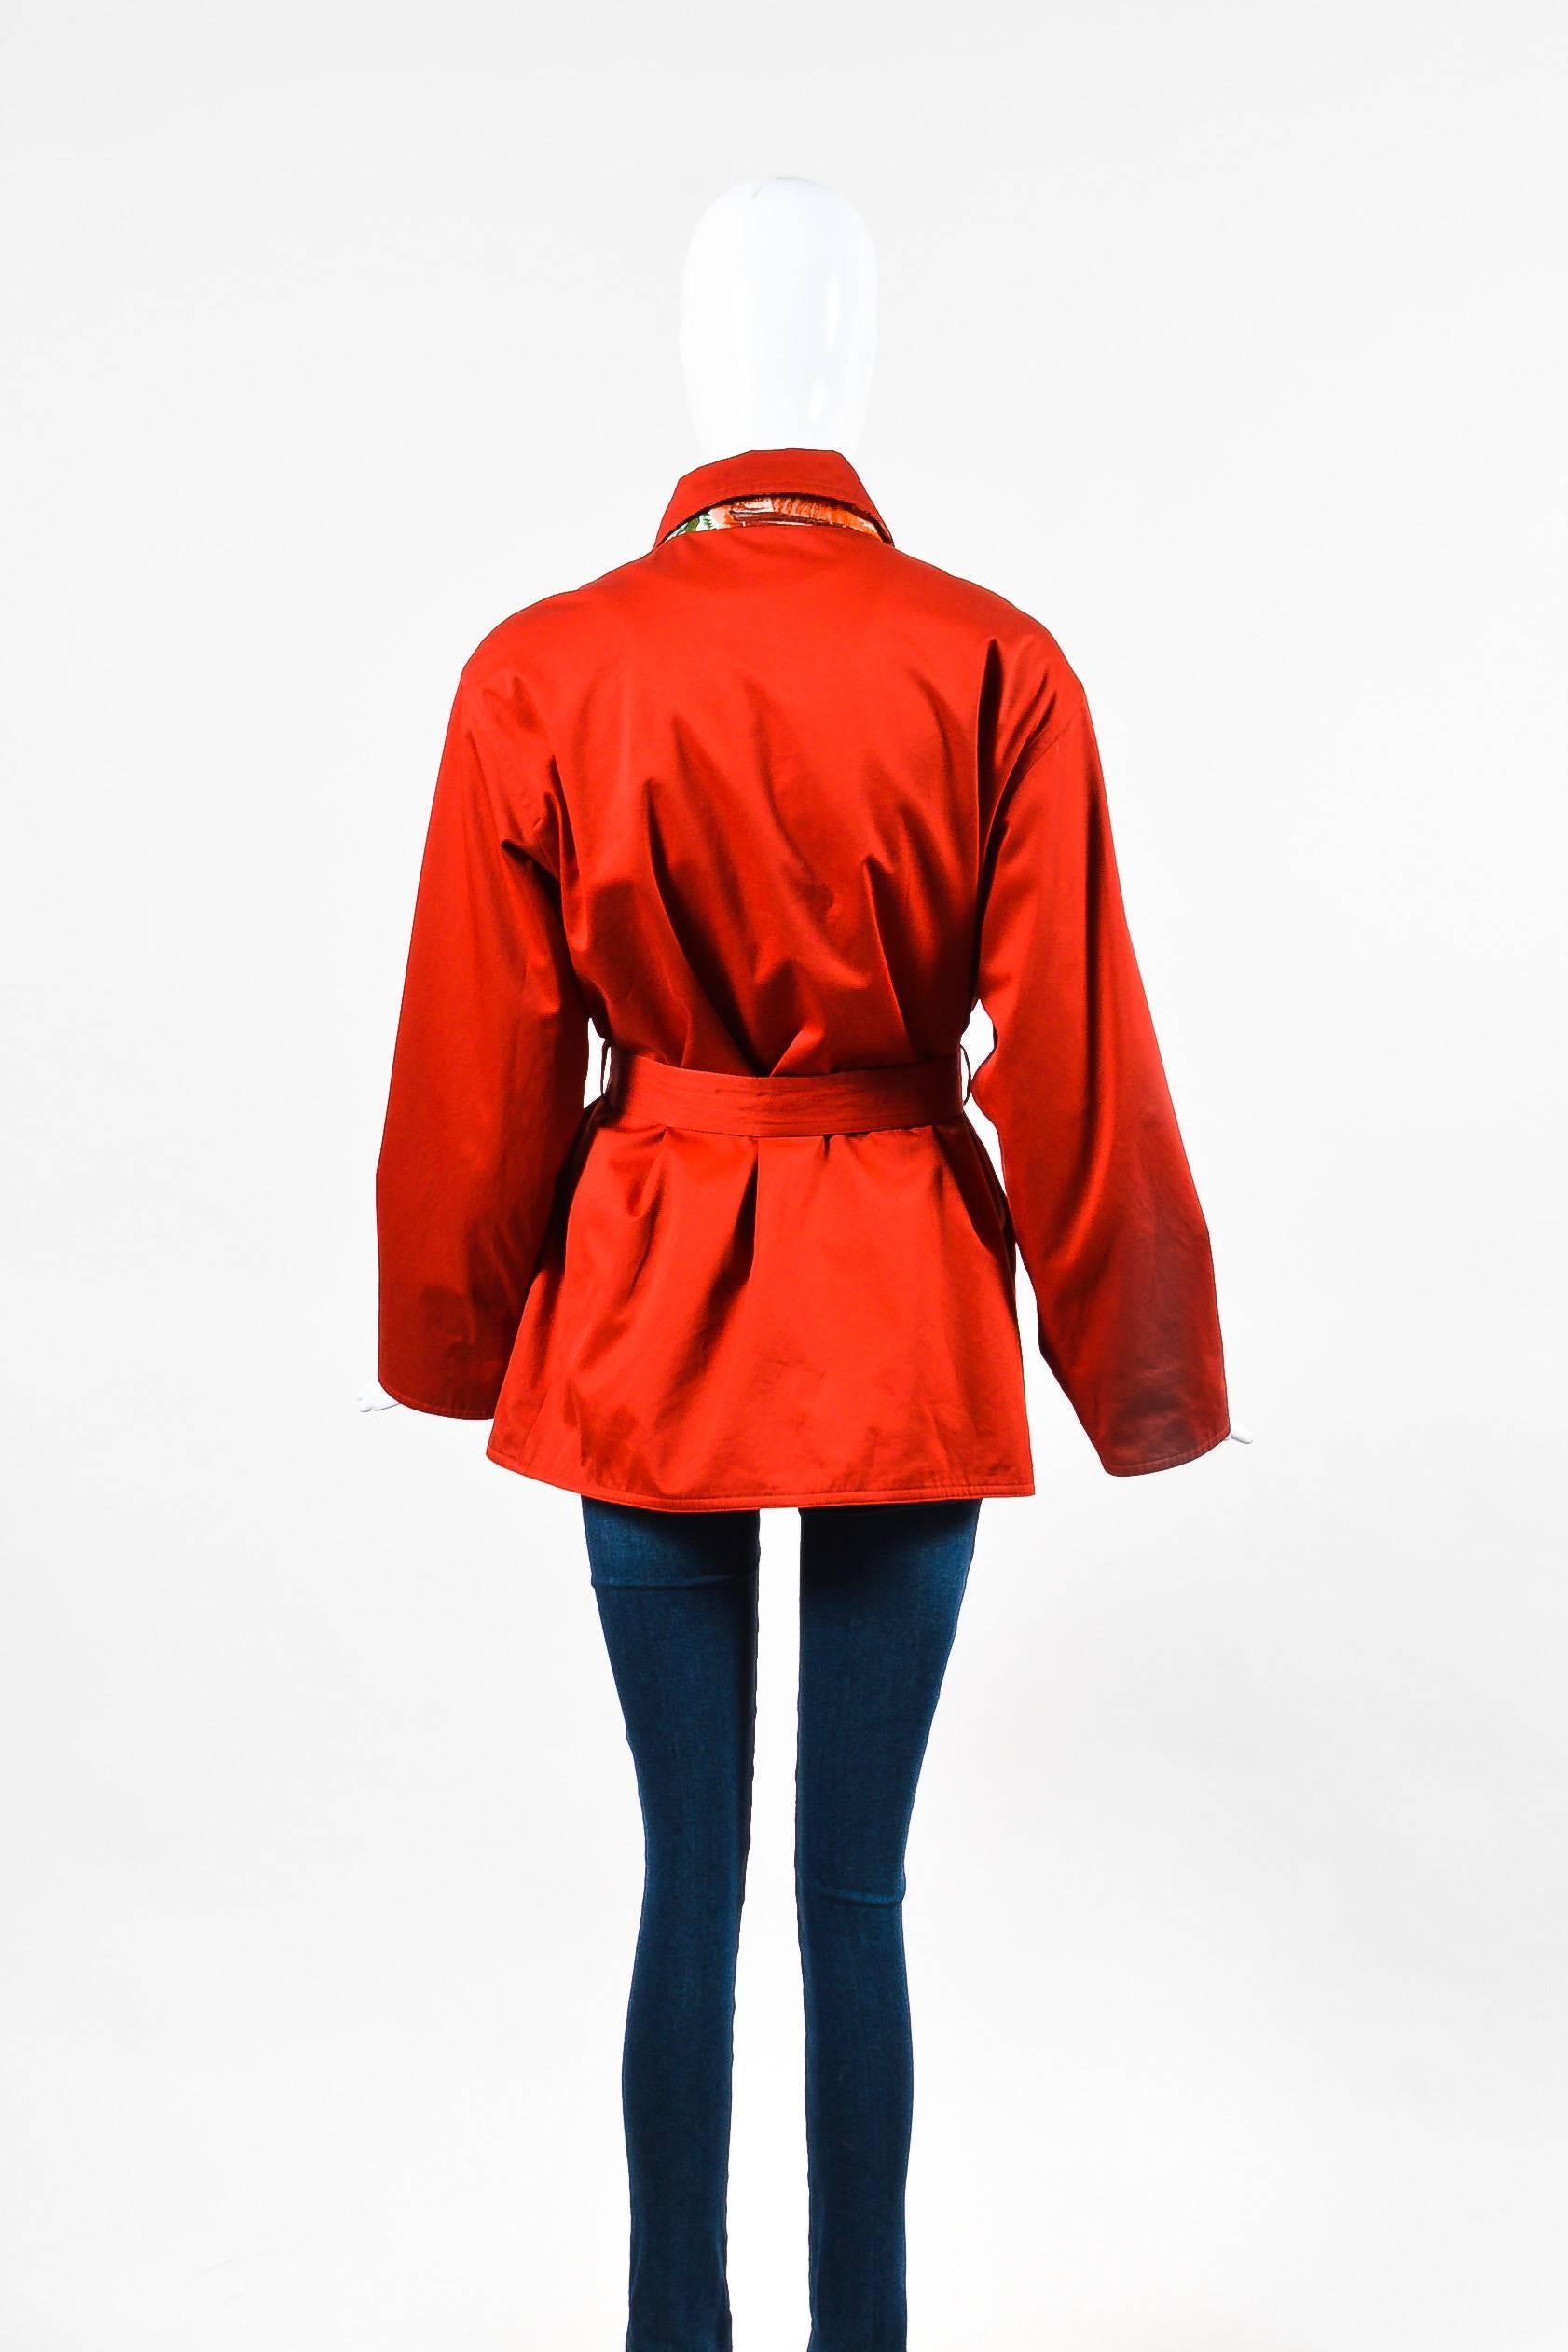 Vintage and rare red-orange reversible jacket by Hermes.  This jacket features Texas print by Kermit Oliver on other side.  Each side has two front flat pockets near the waist.  Long Sleeves.  Collared neckline.  Optional waist belt.

Additional